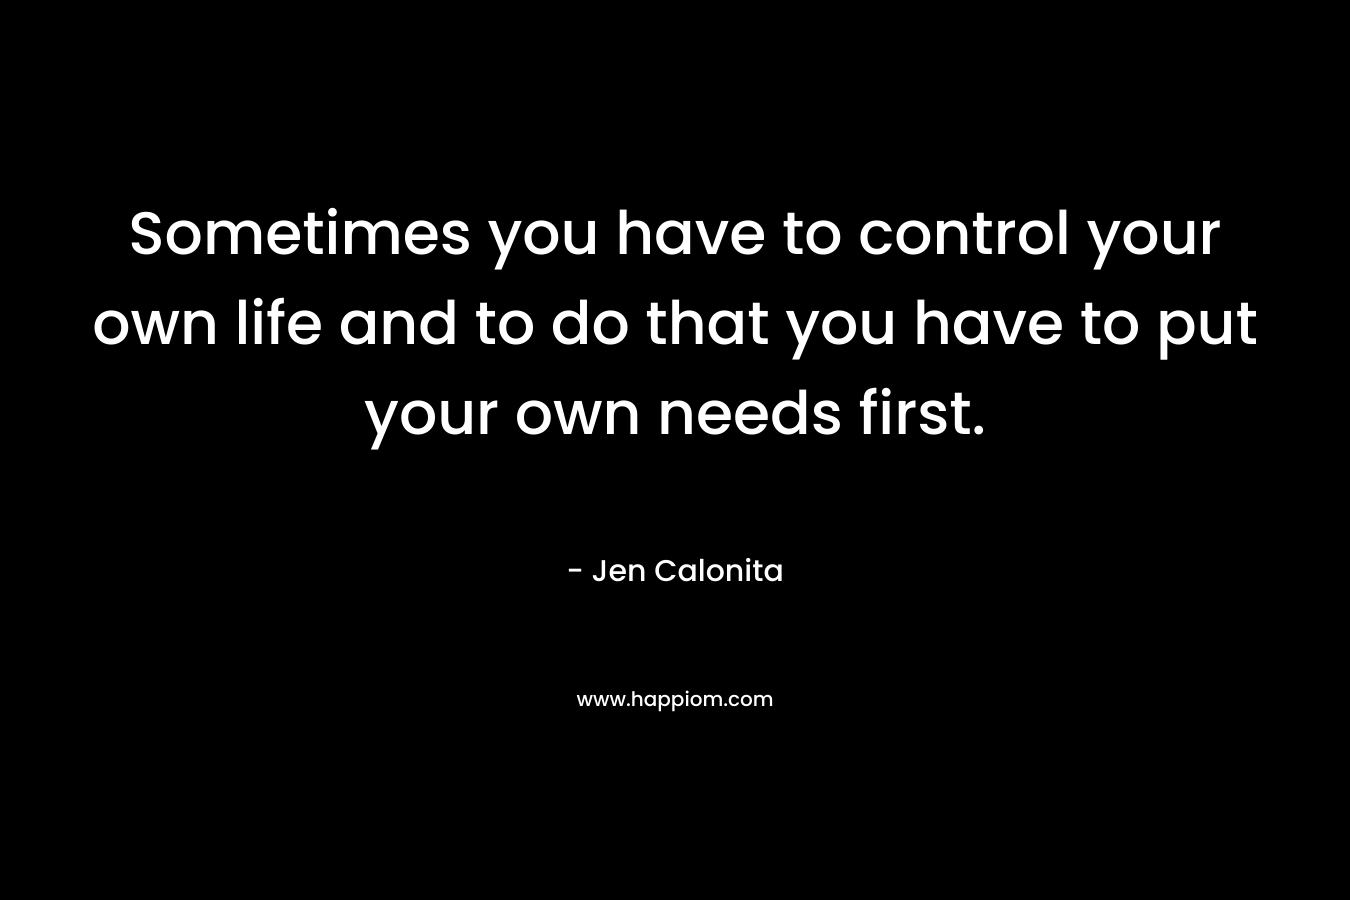 Sometimes you have to control your own life and to do that you have to put your own needs first.